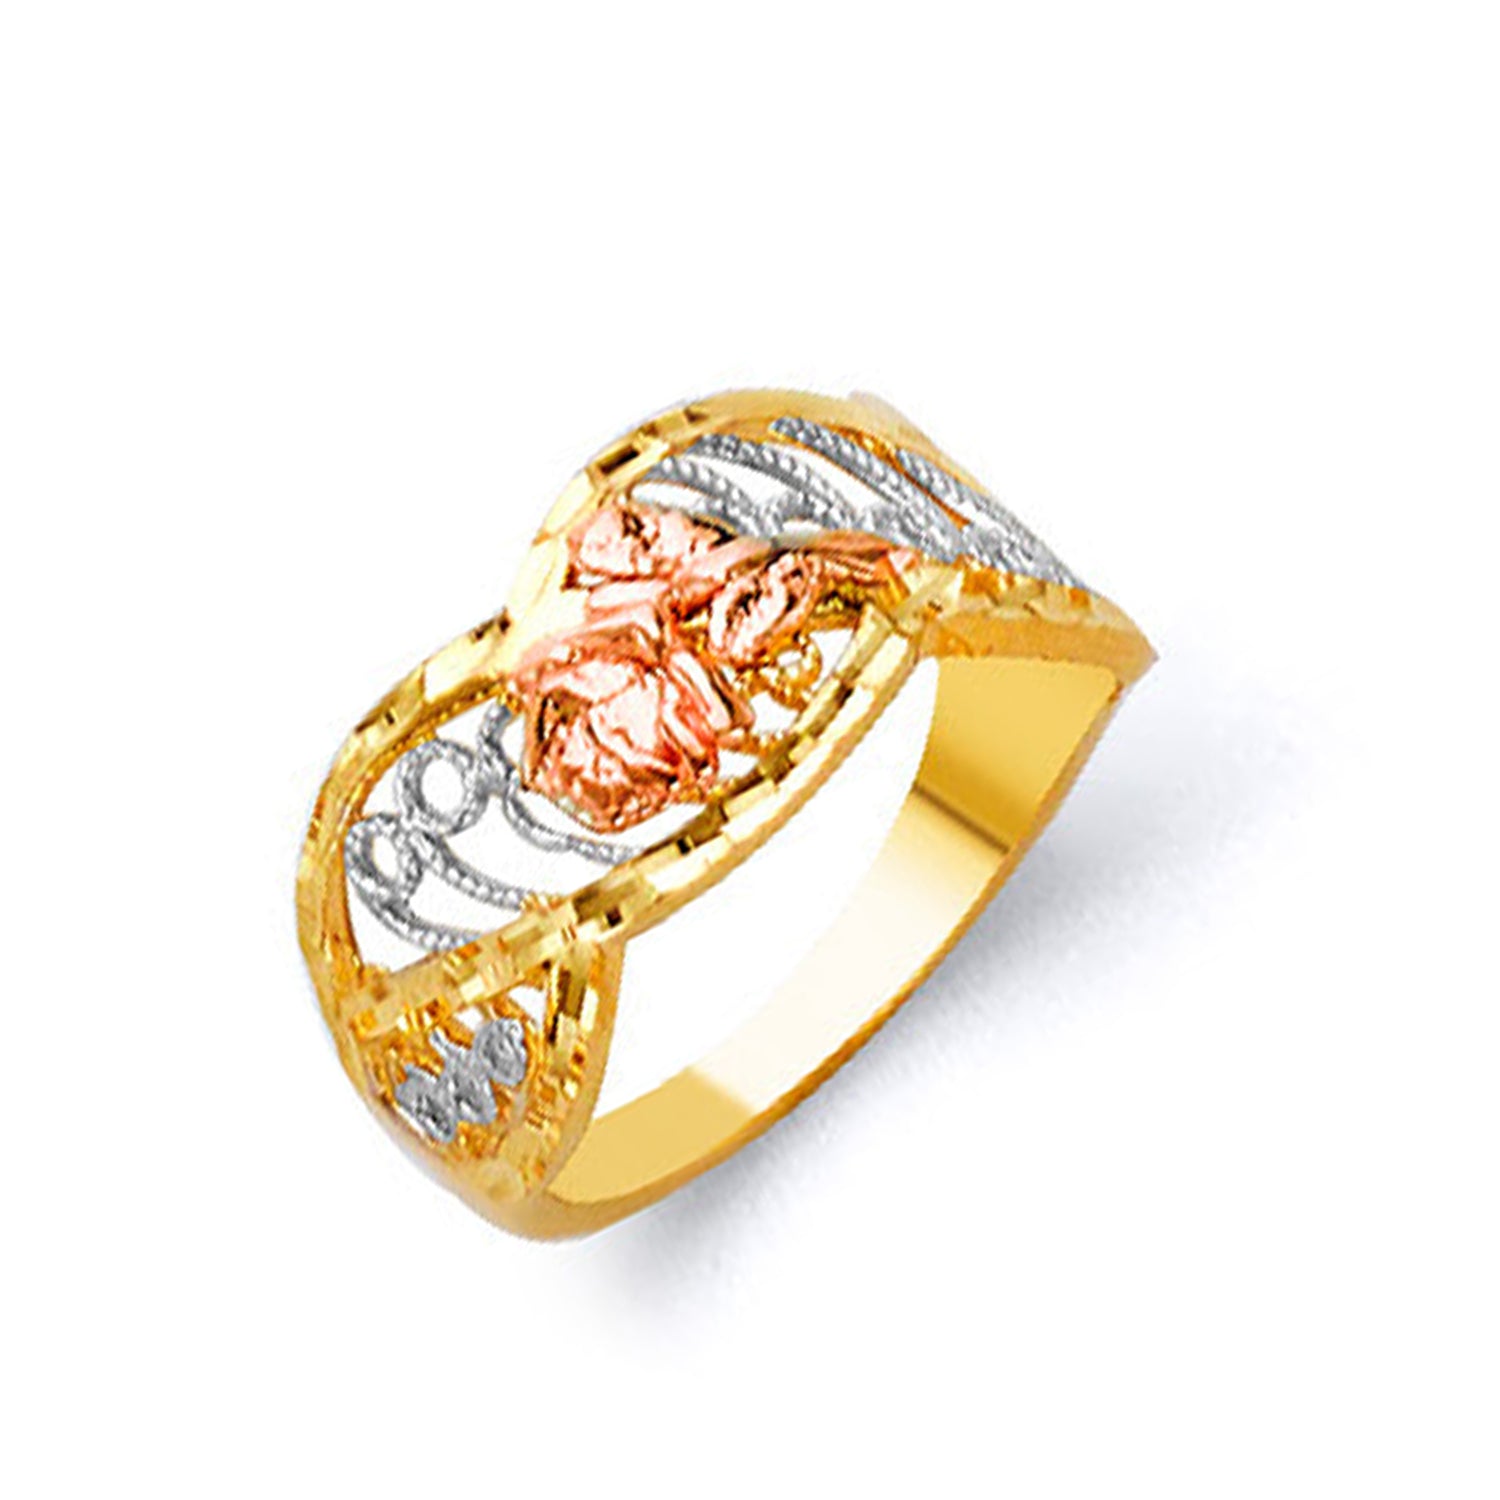 Surreal Cuban Chain Ring in Solid Gold 